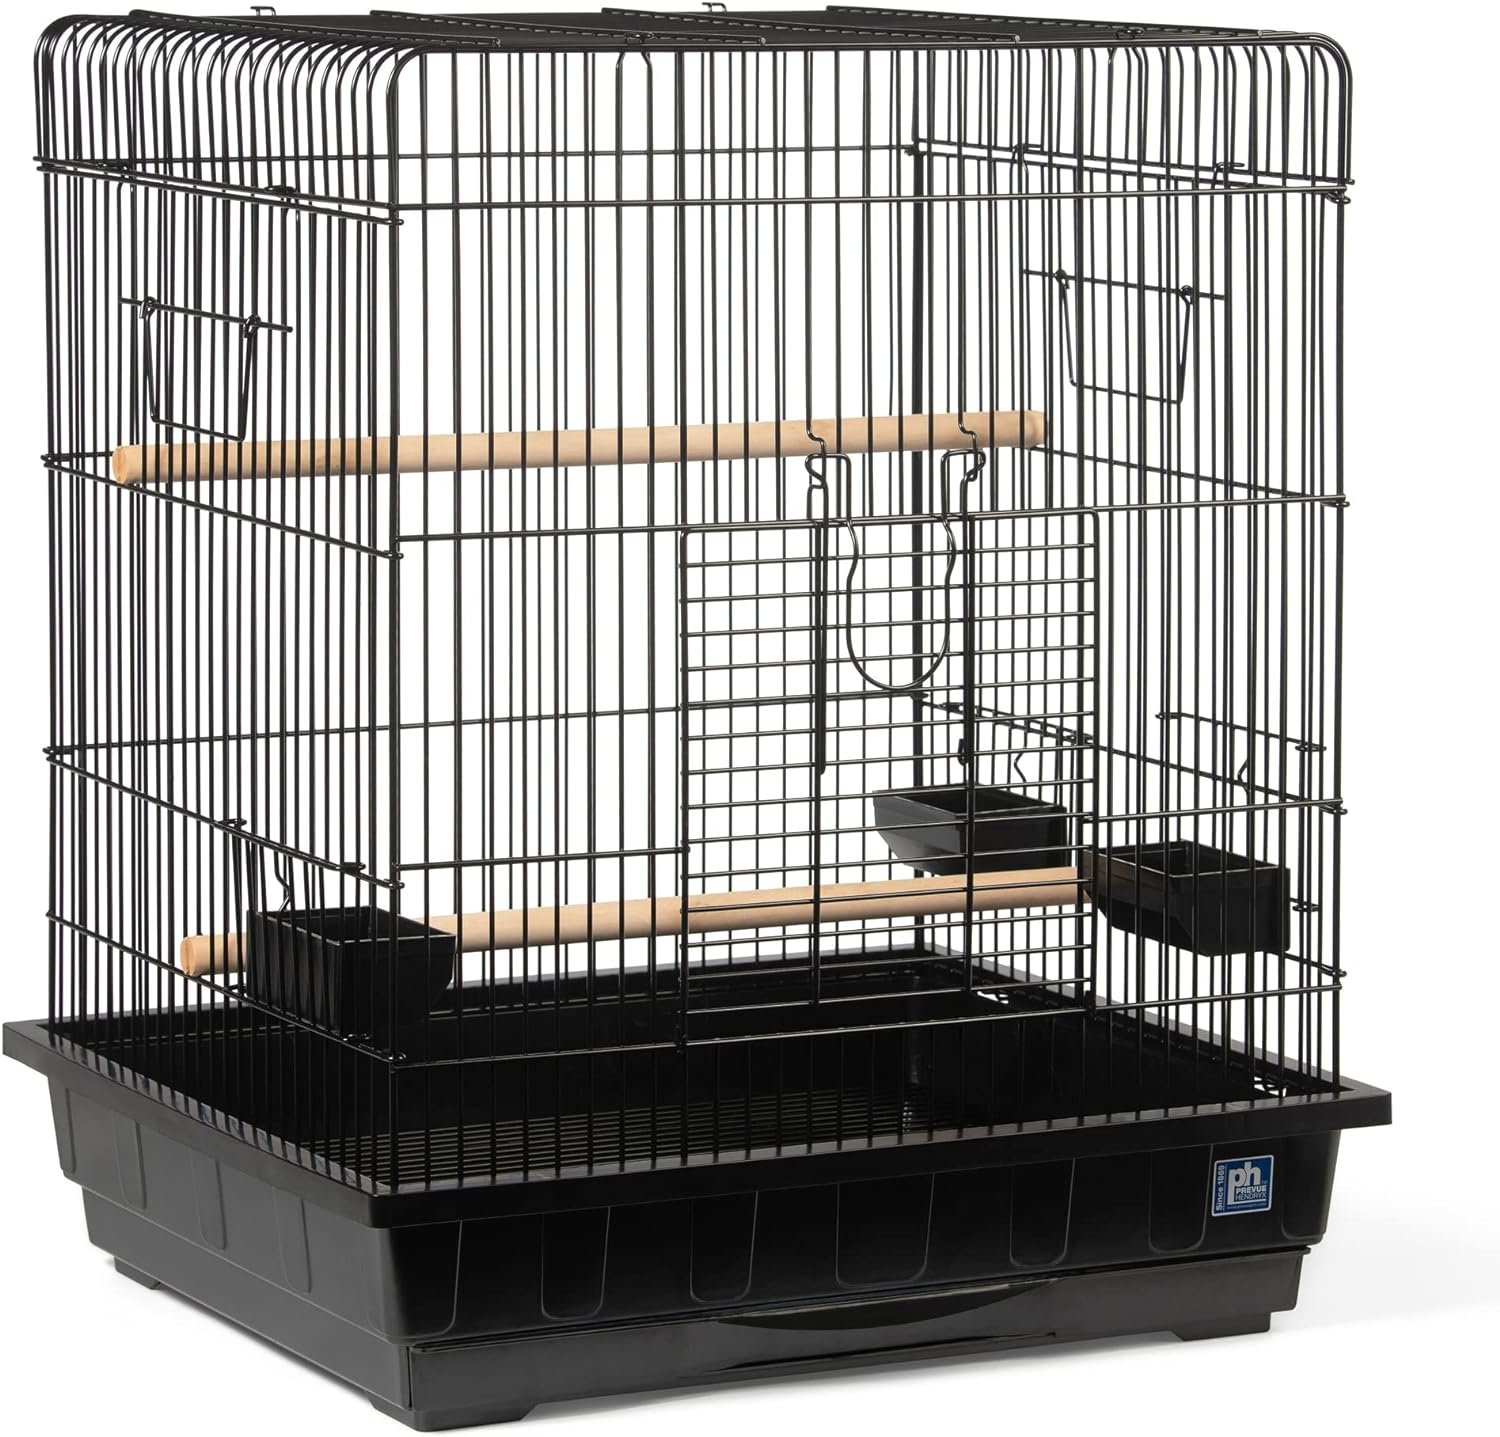 Prevue Hendryx Square Roof Parrot Cage, Black (SP25217B/B)